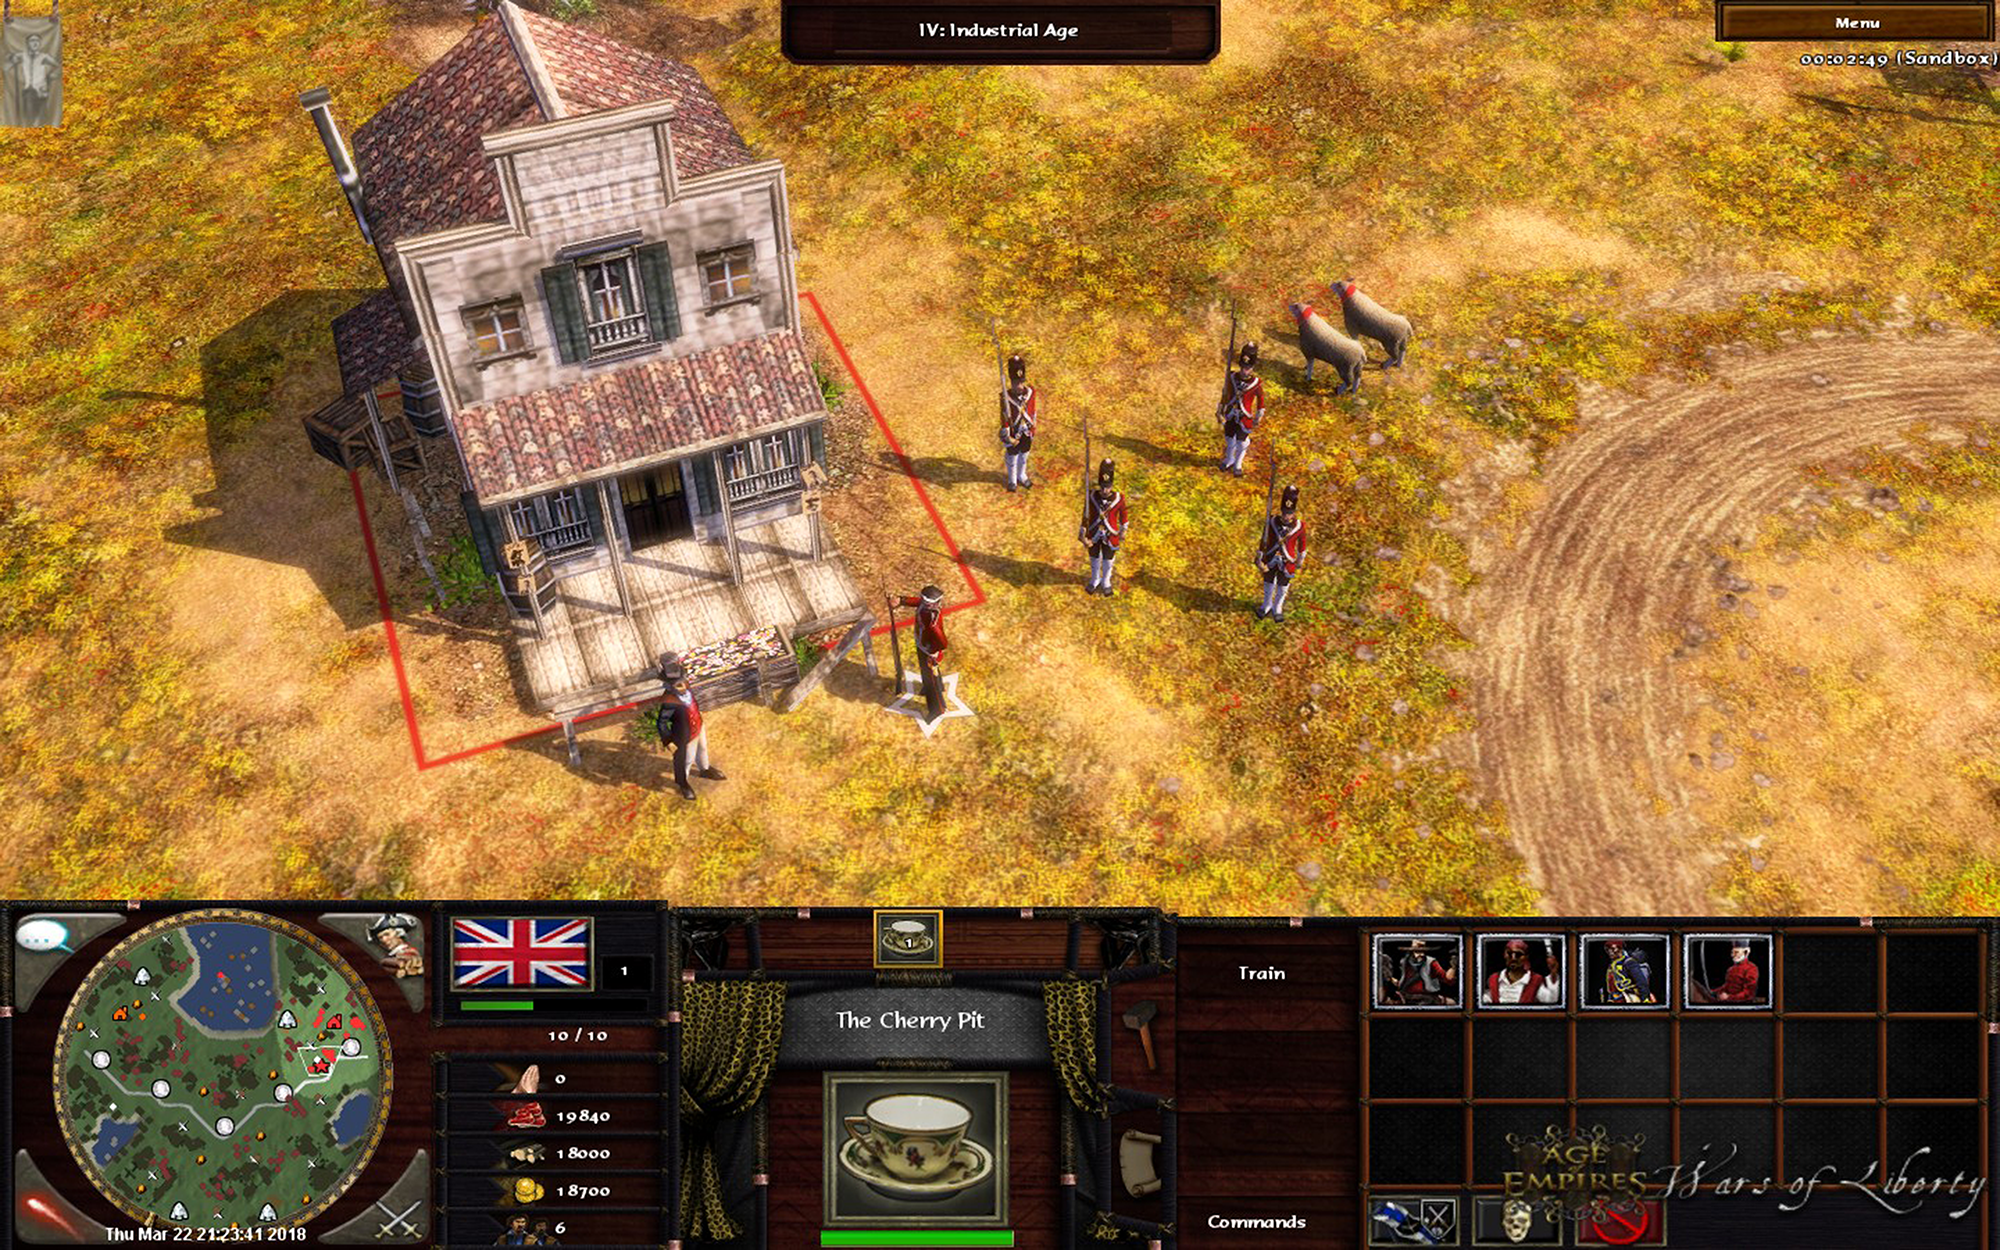 age of empires 3 asian dynasties product keys